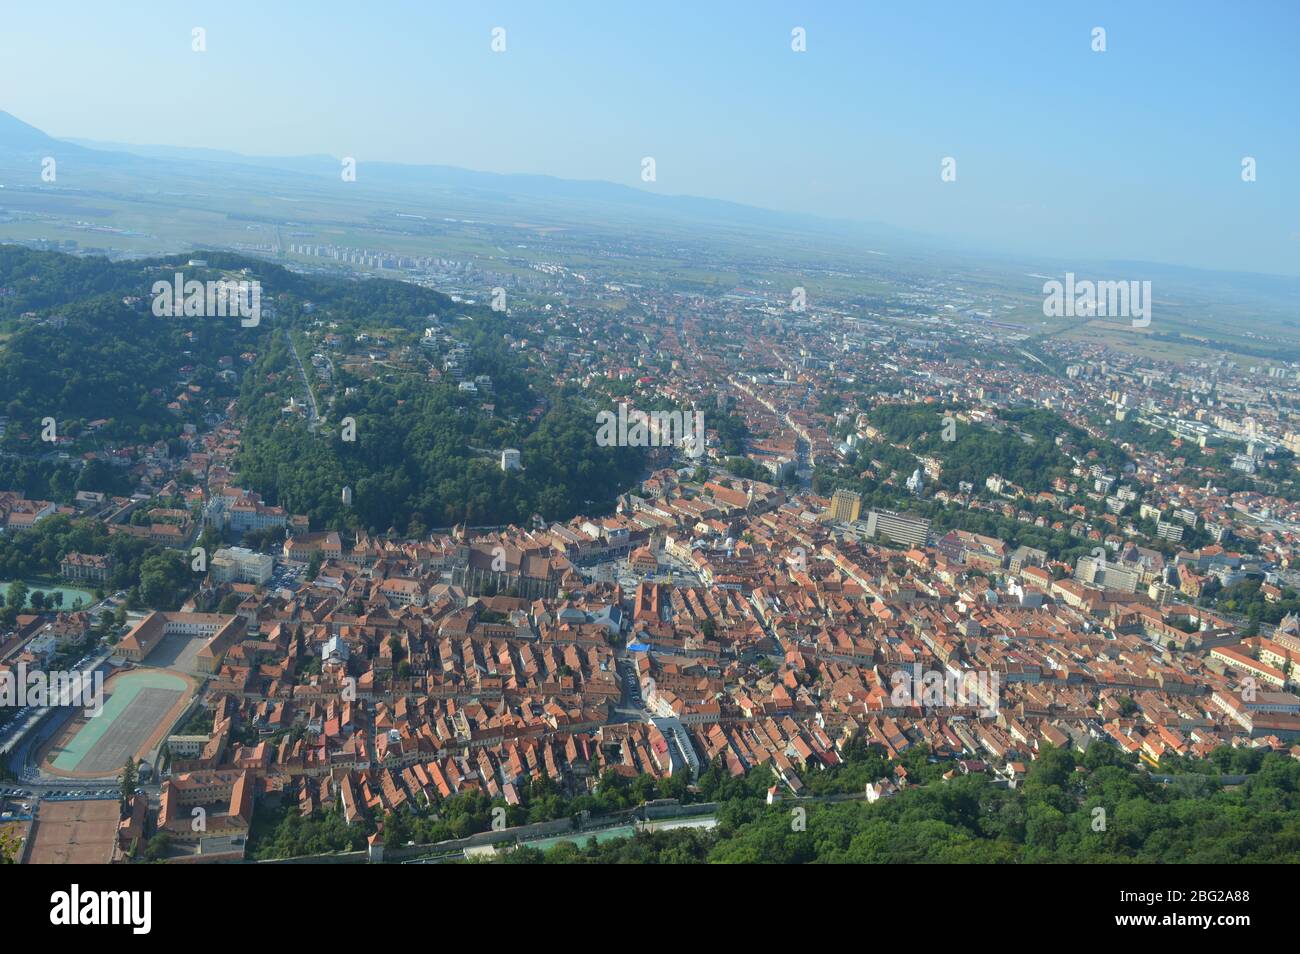 Brasov city from the top, Romania Stock Photo